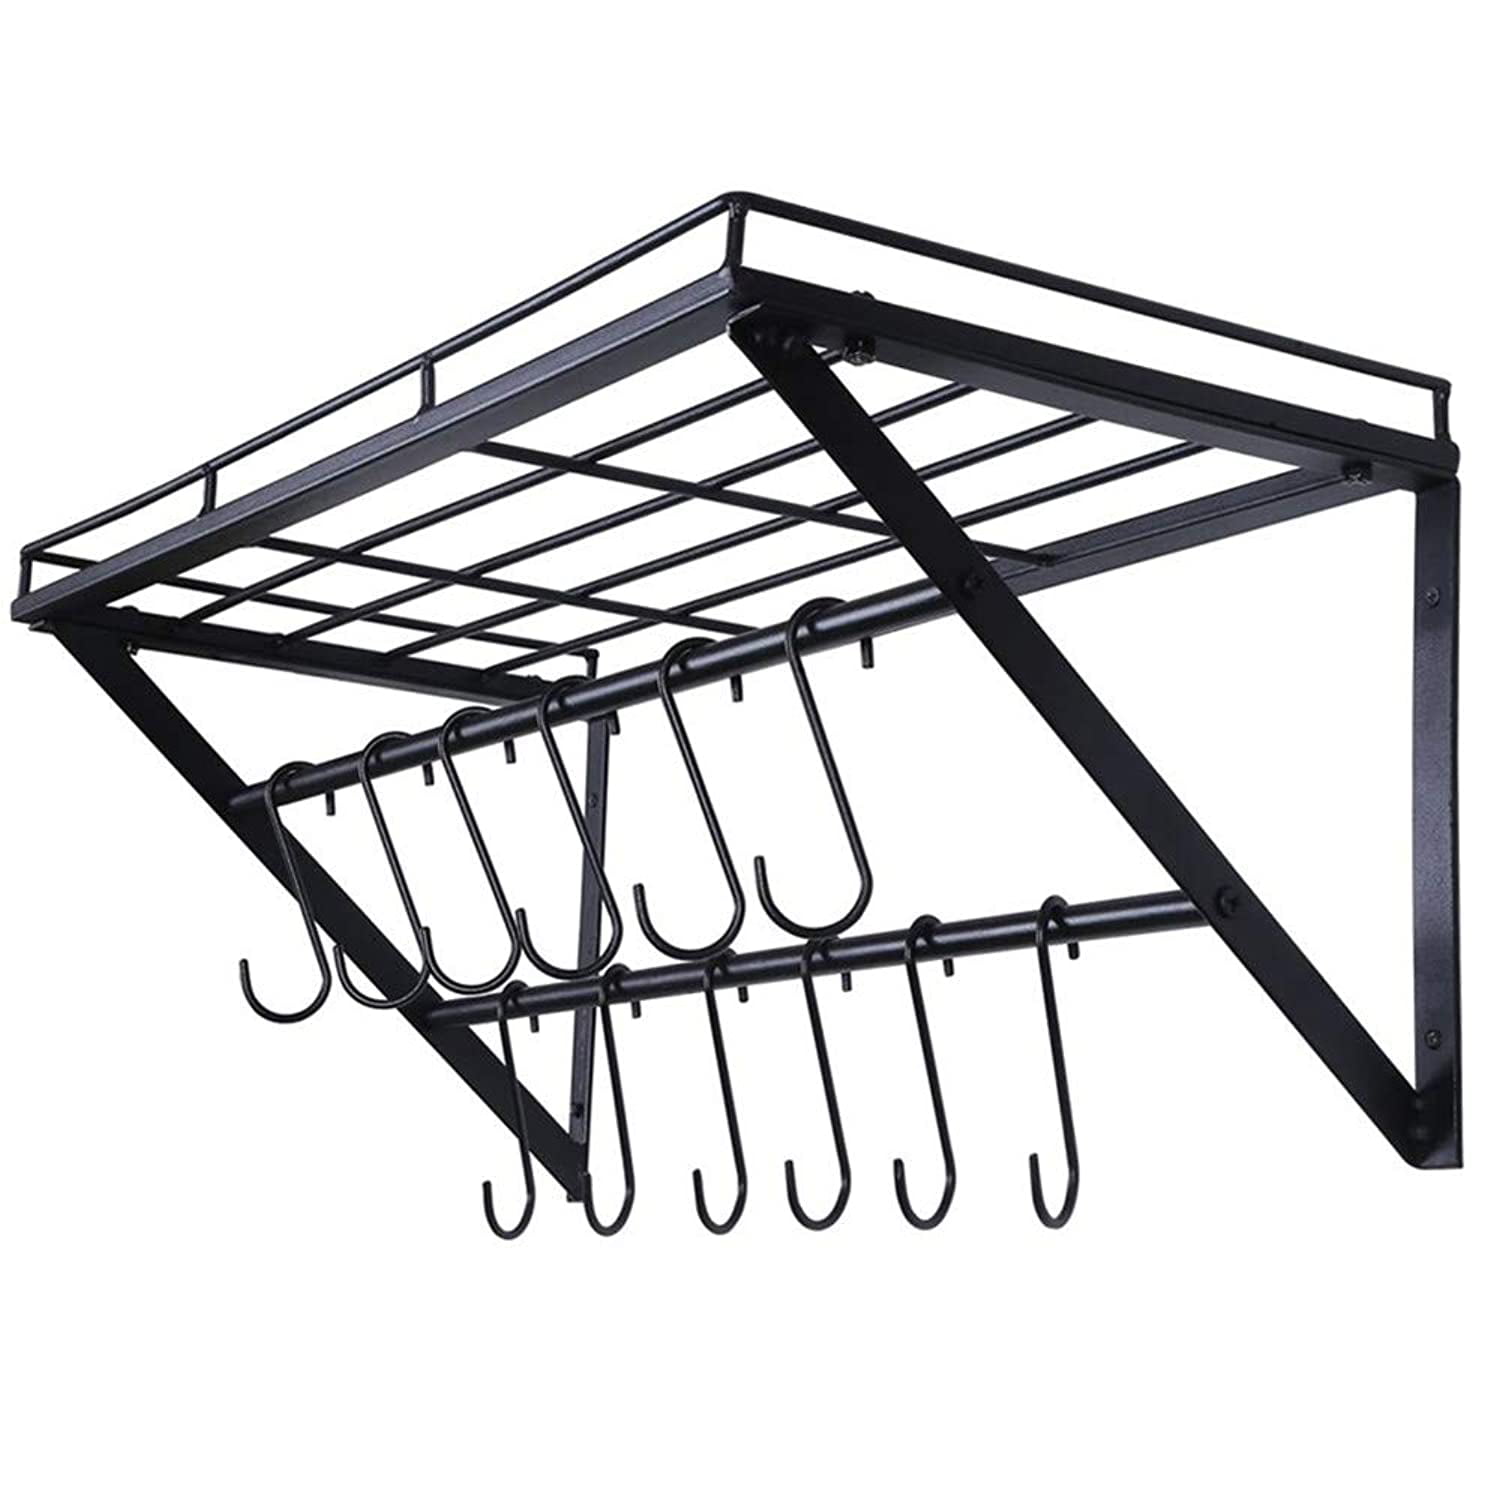 OROPY Wall Mounted Pot Rack Storage Shelf with Tier Hanging Rails 12 S  Hooks included, Ideal for Pans, Utensils, Cookware, Plant Black 